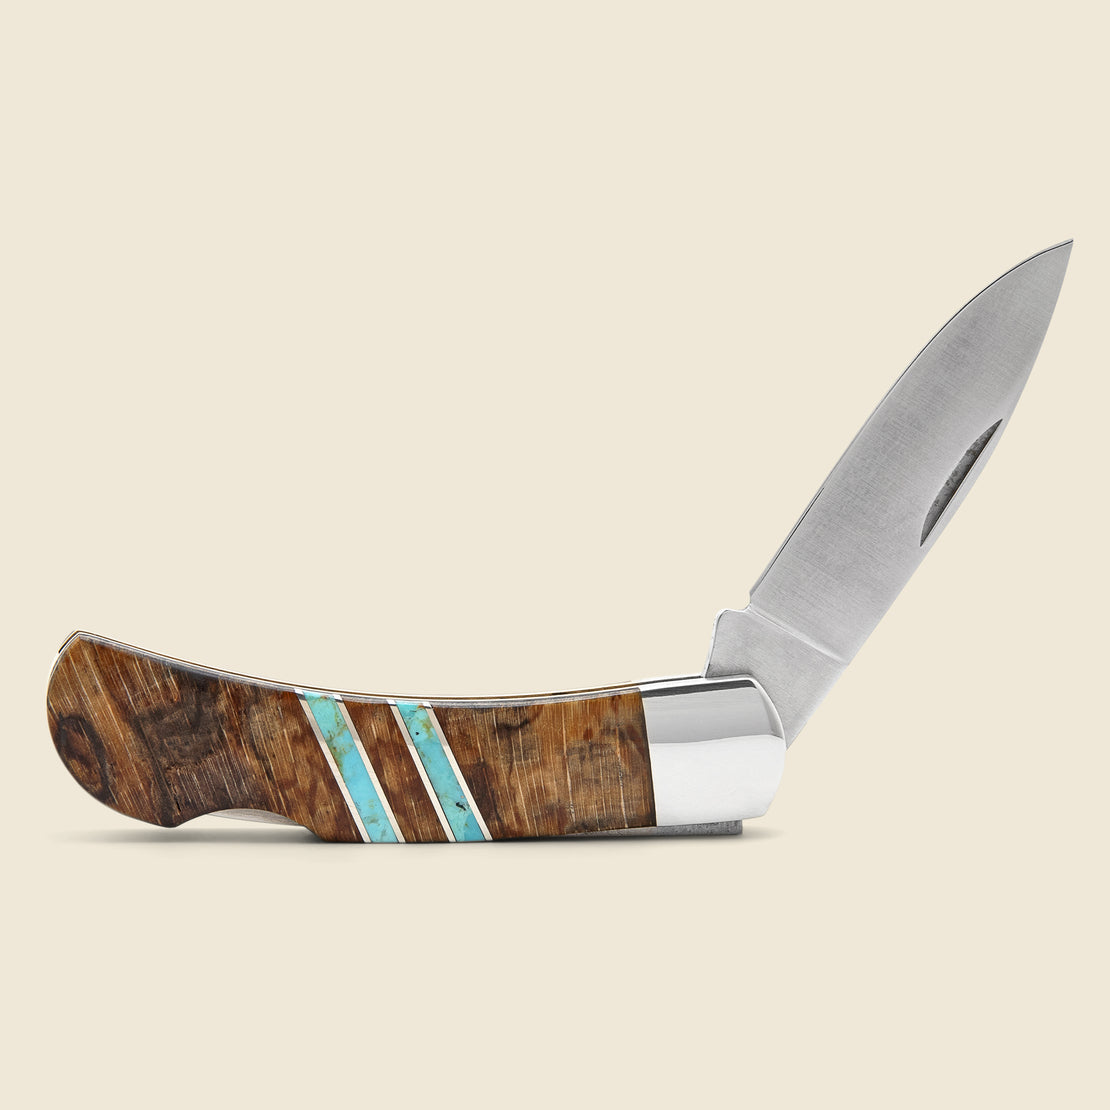 Home 3-Inch Lockback Knife - Spalted Beech/Turquoise